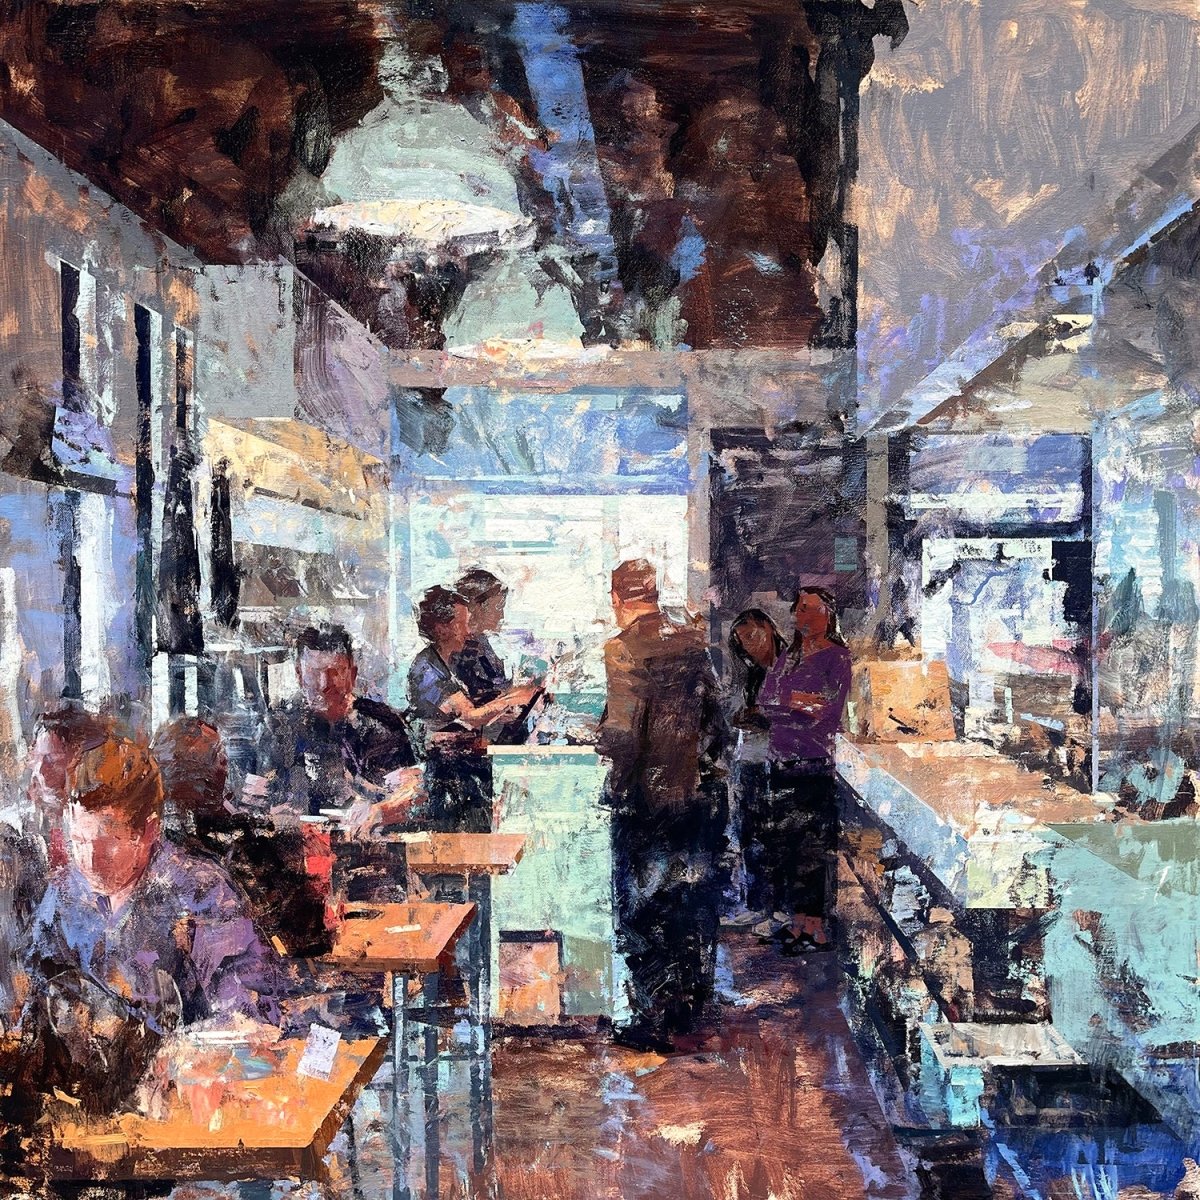 Cafe Cadence by Mark Bailey at LePrince Galleries